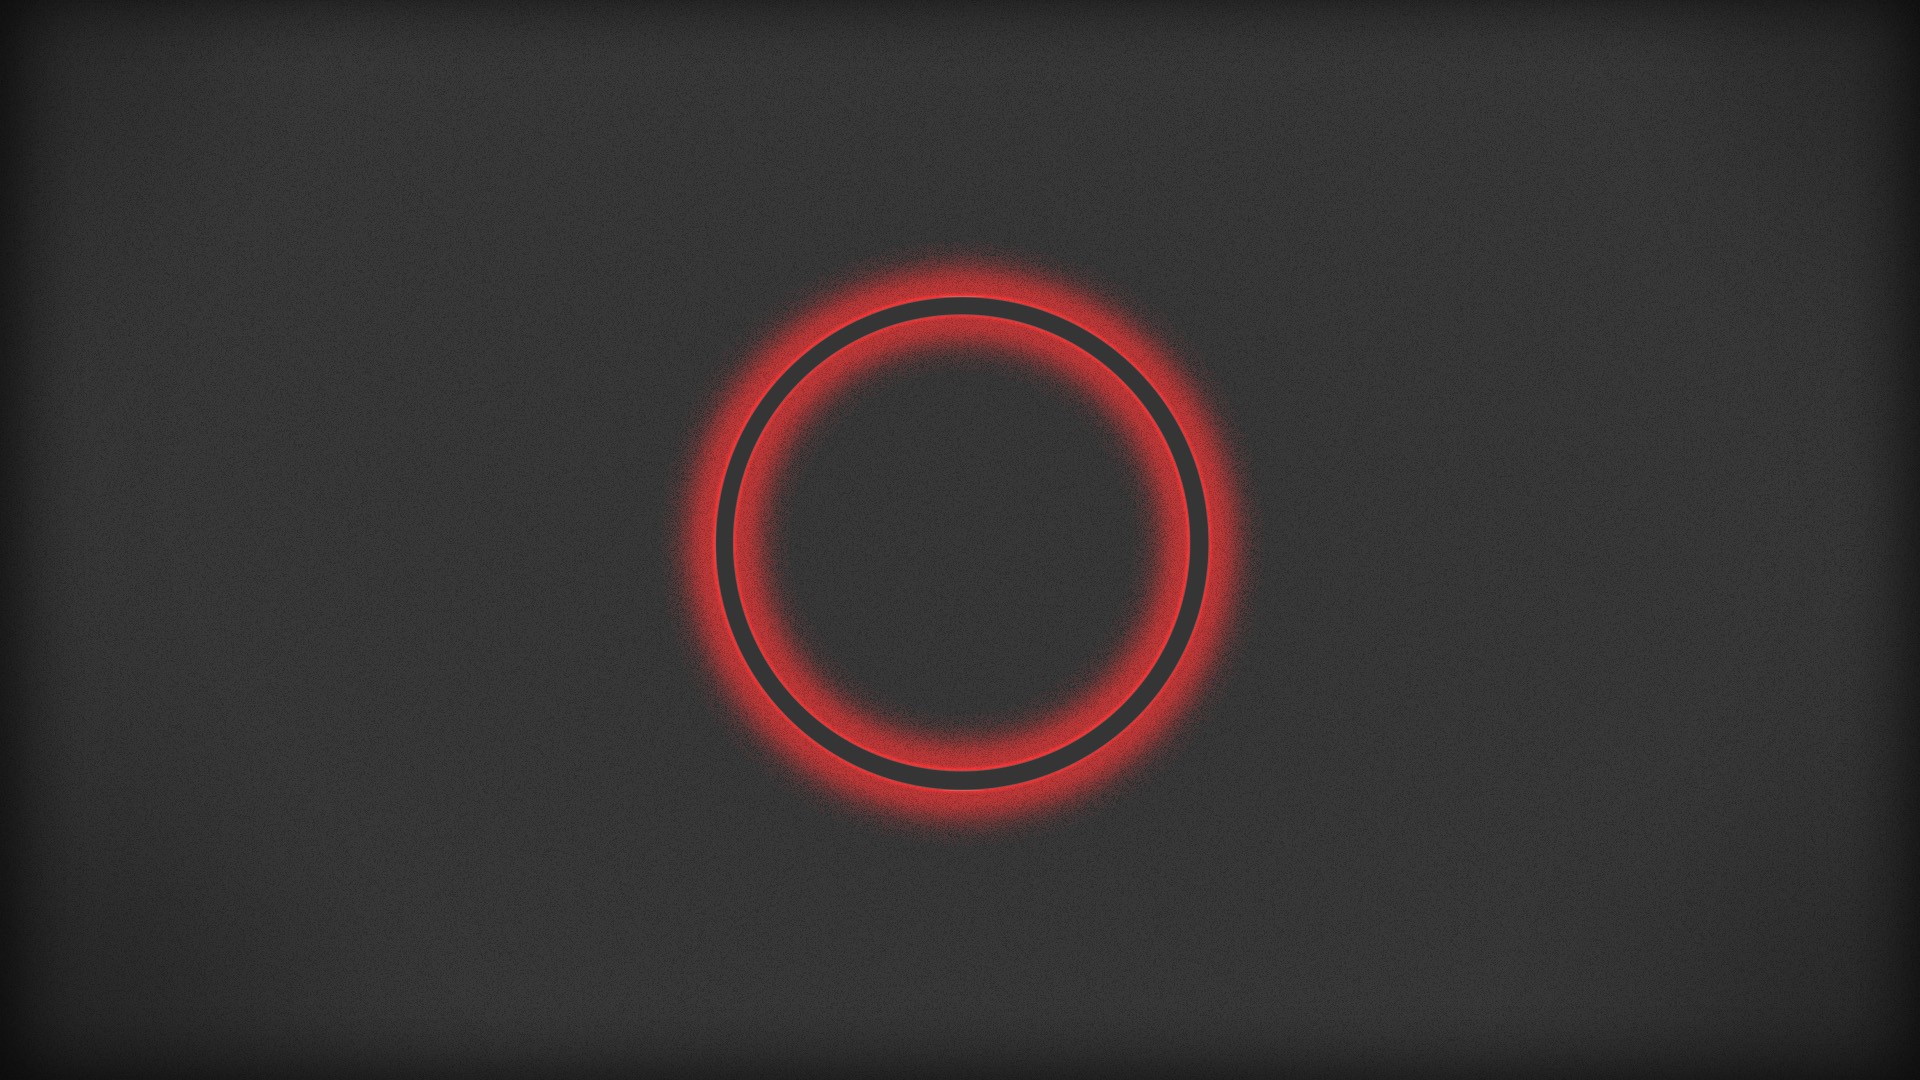 The red circle on a gray background Desktop wallpaper 1920x1080